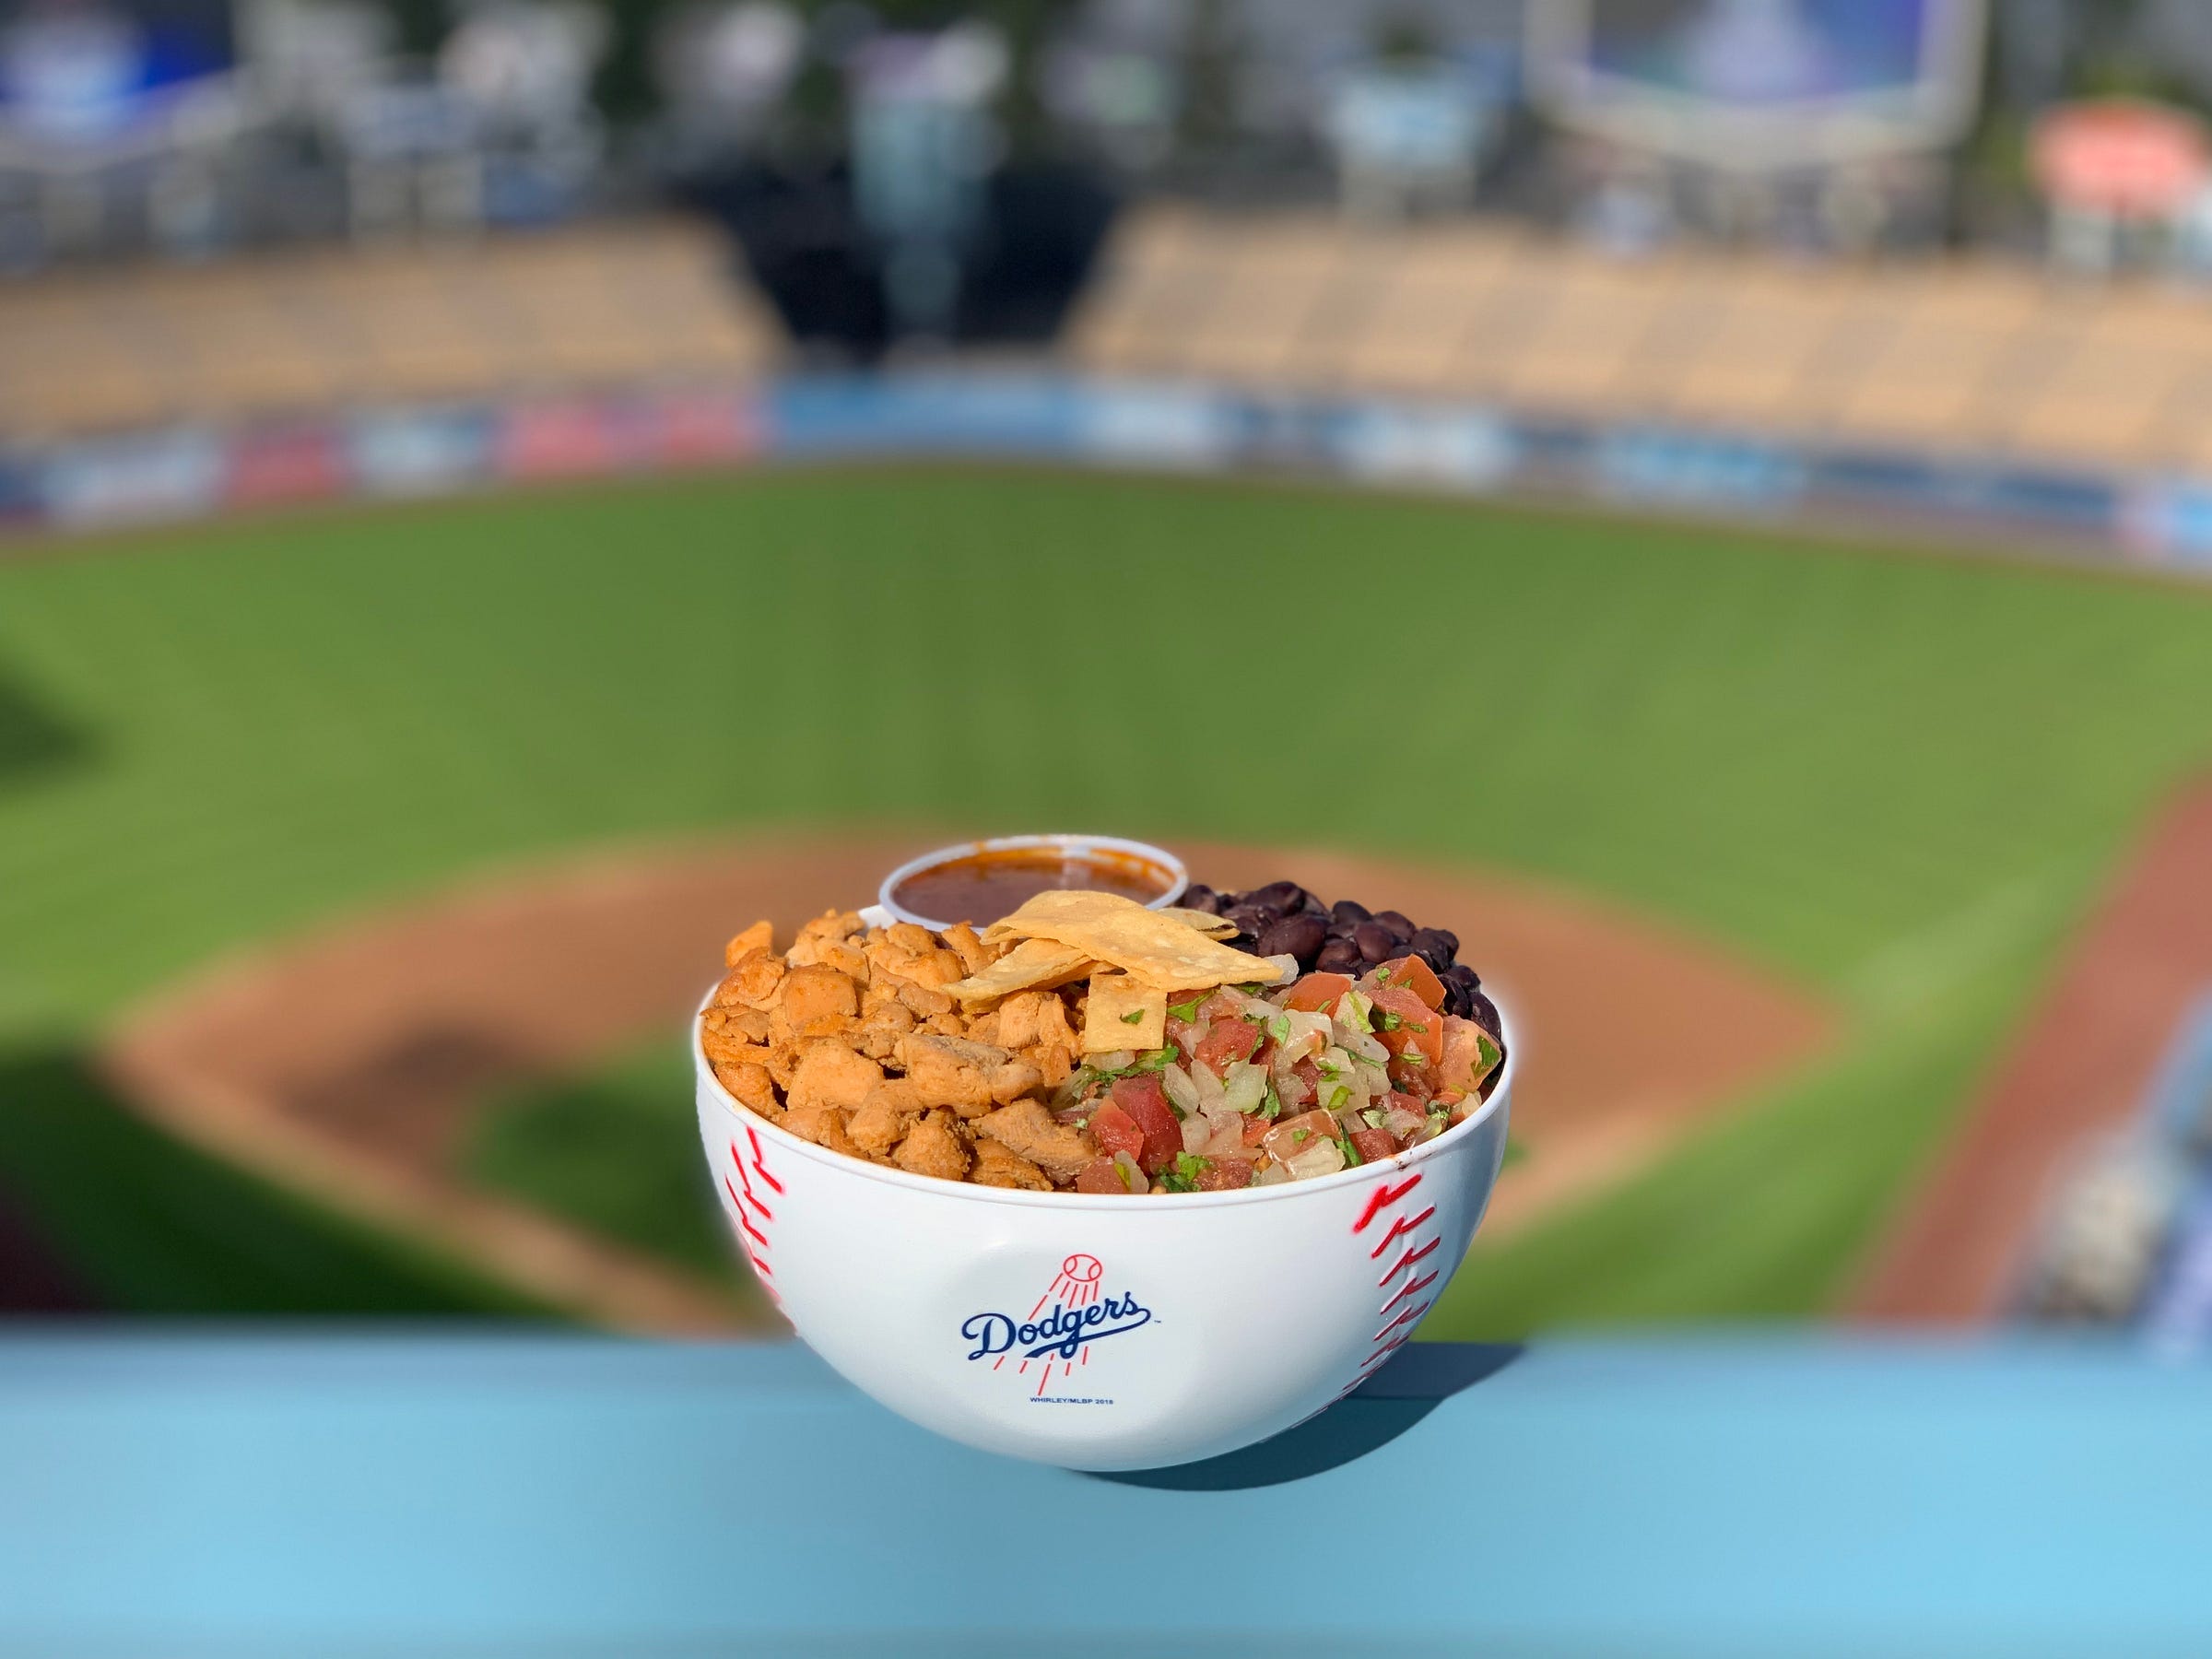 Photos New food items unveiled at Dodger Stadium in 2019